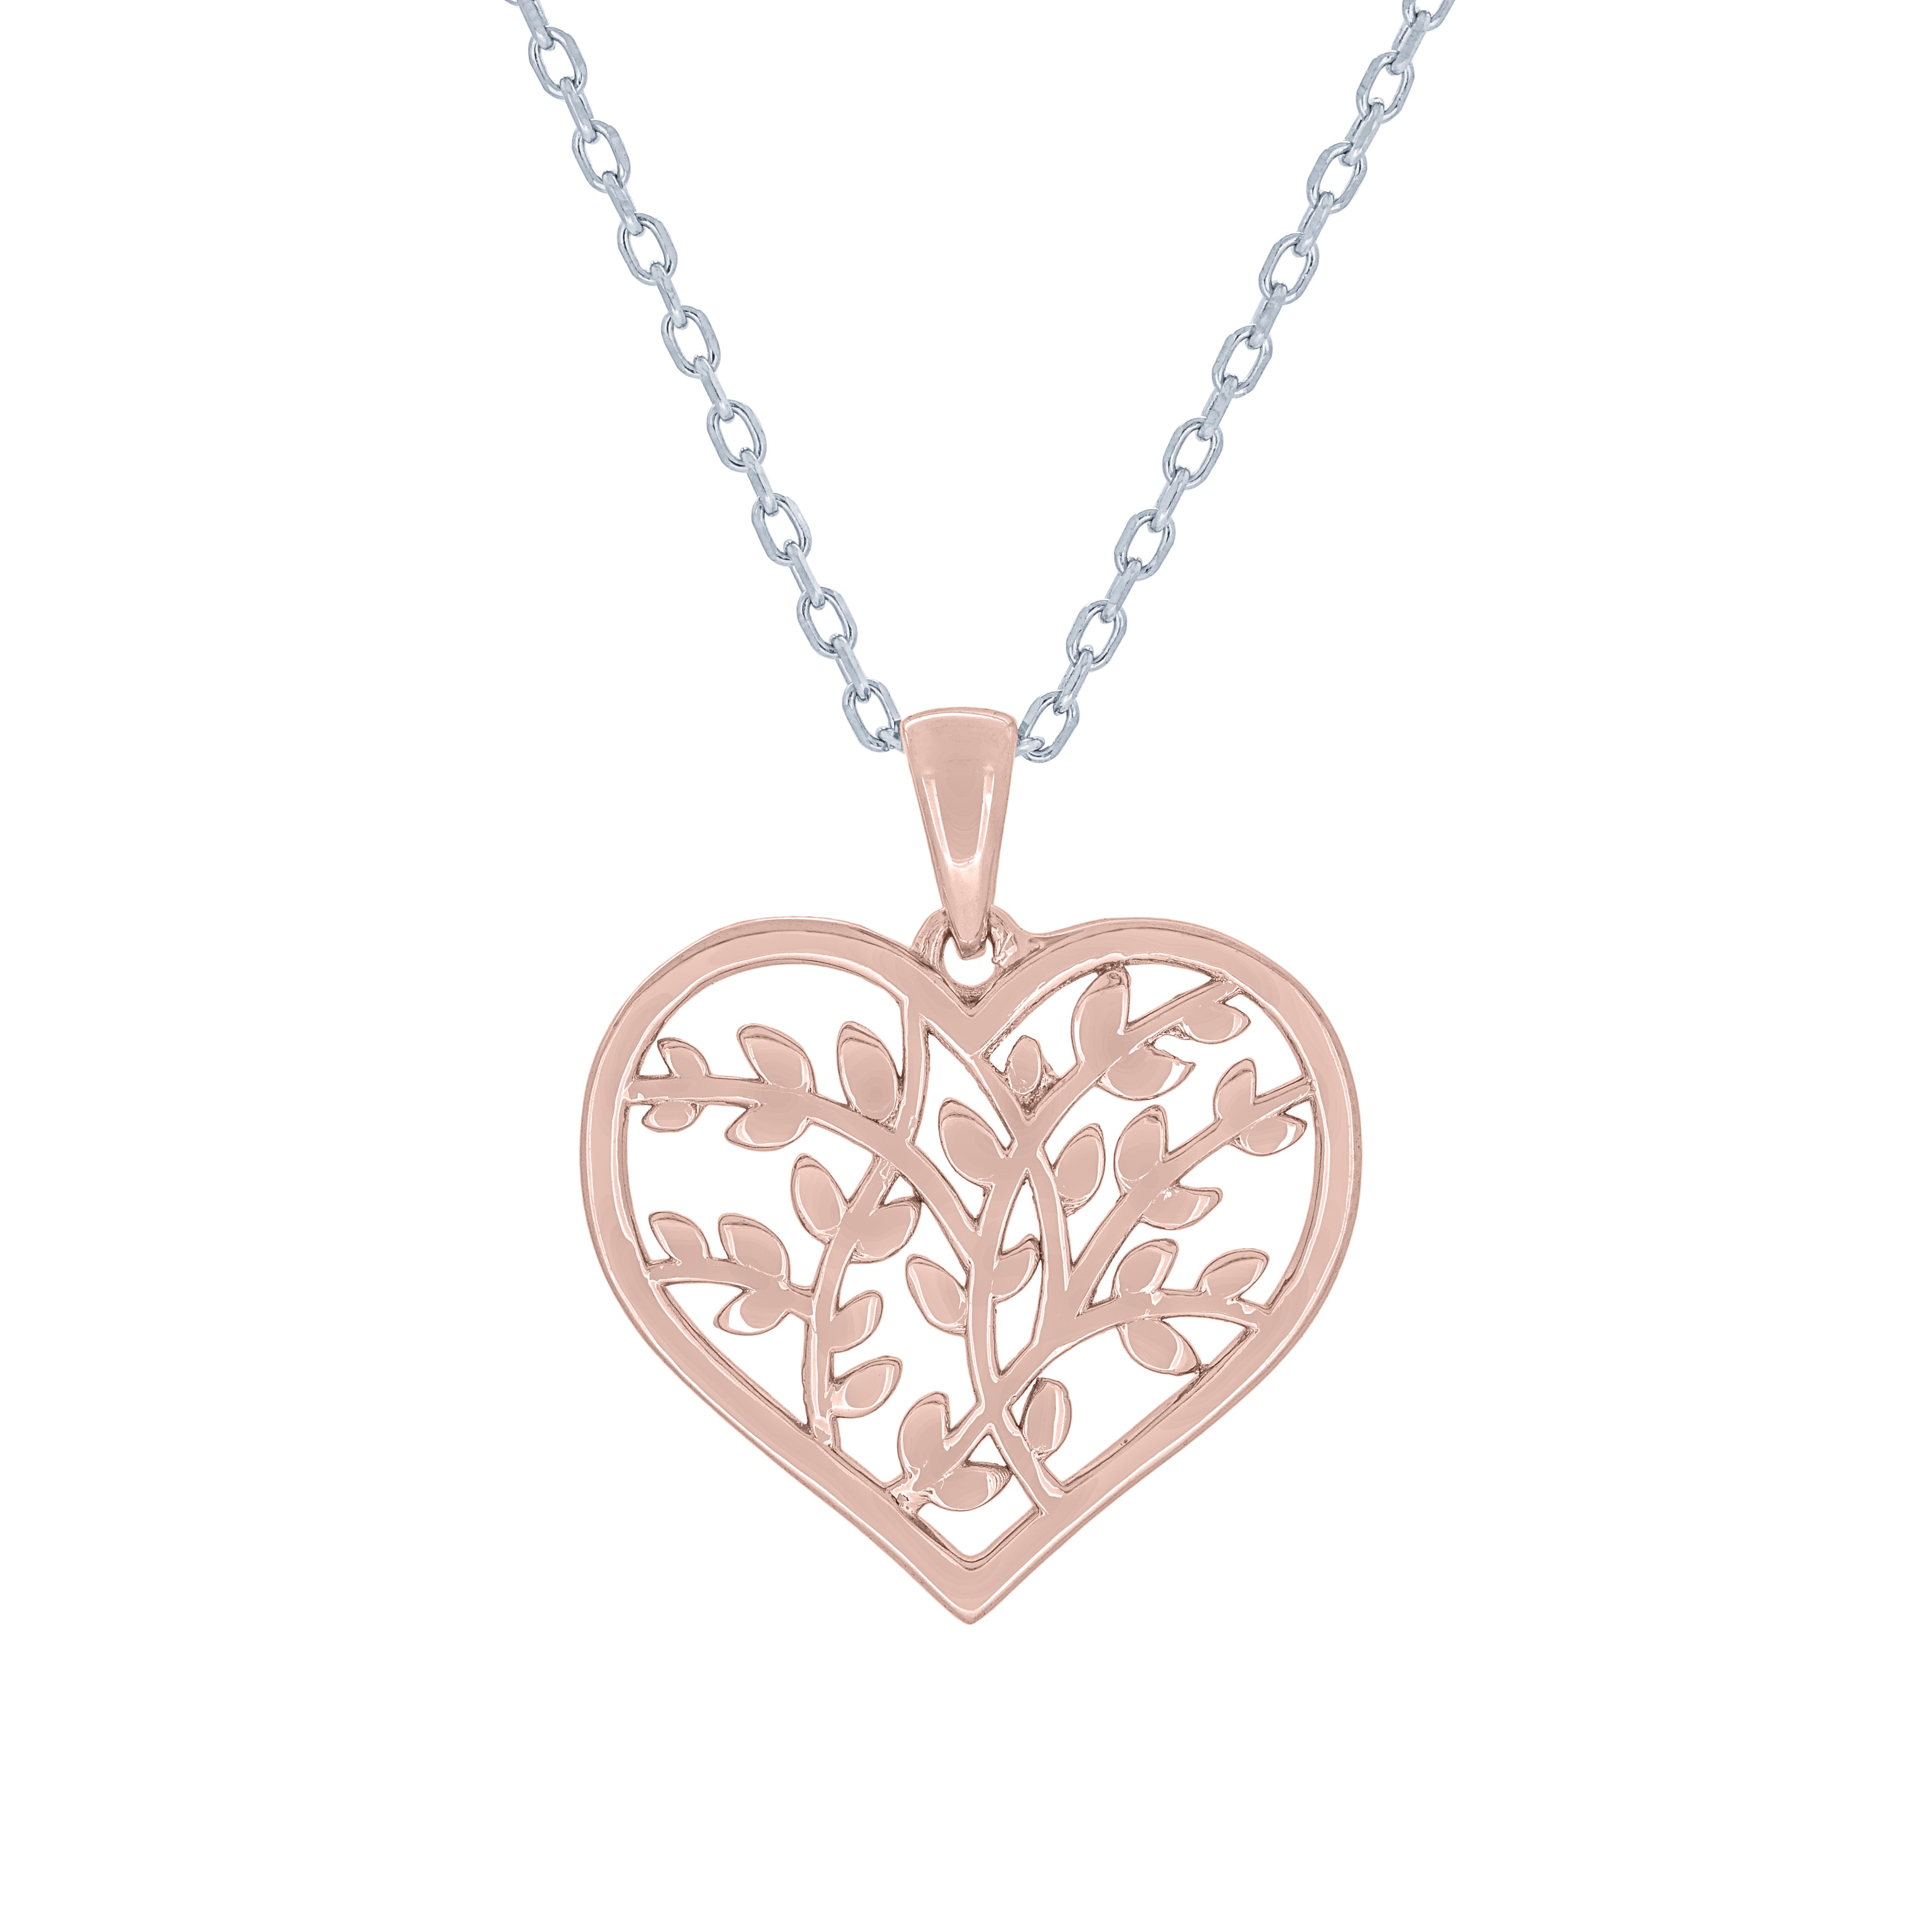 (100118A) Olive Leaf Heart Pendant Necklace In Sterling Silver and Rose Gold Plate